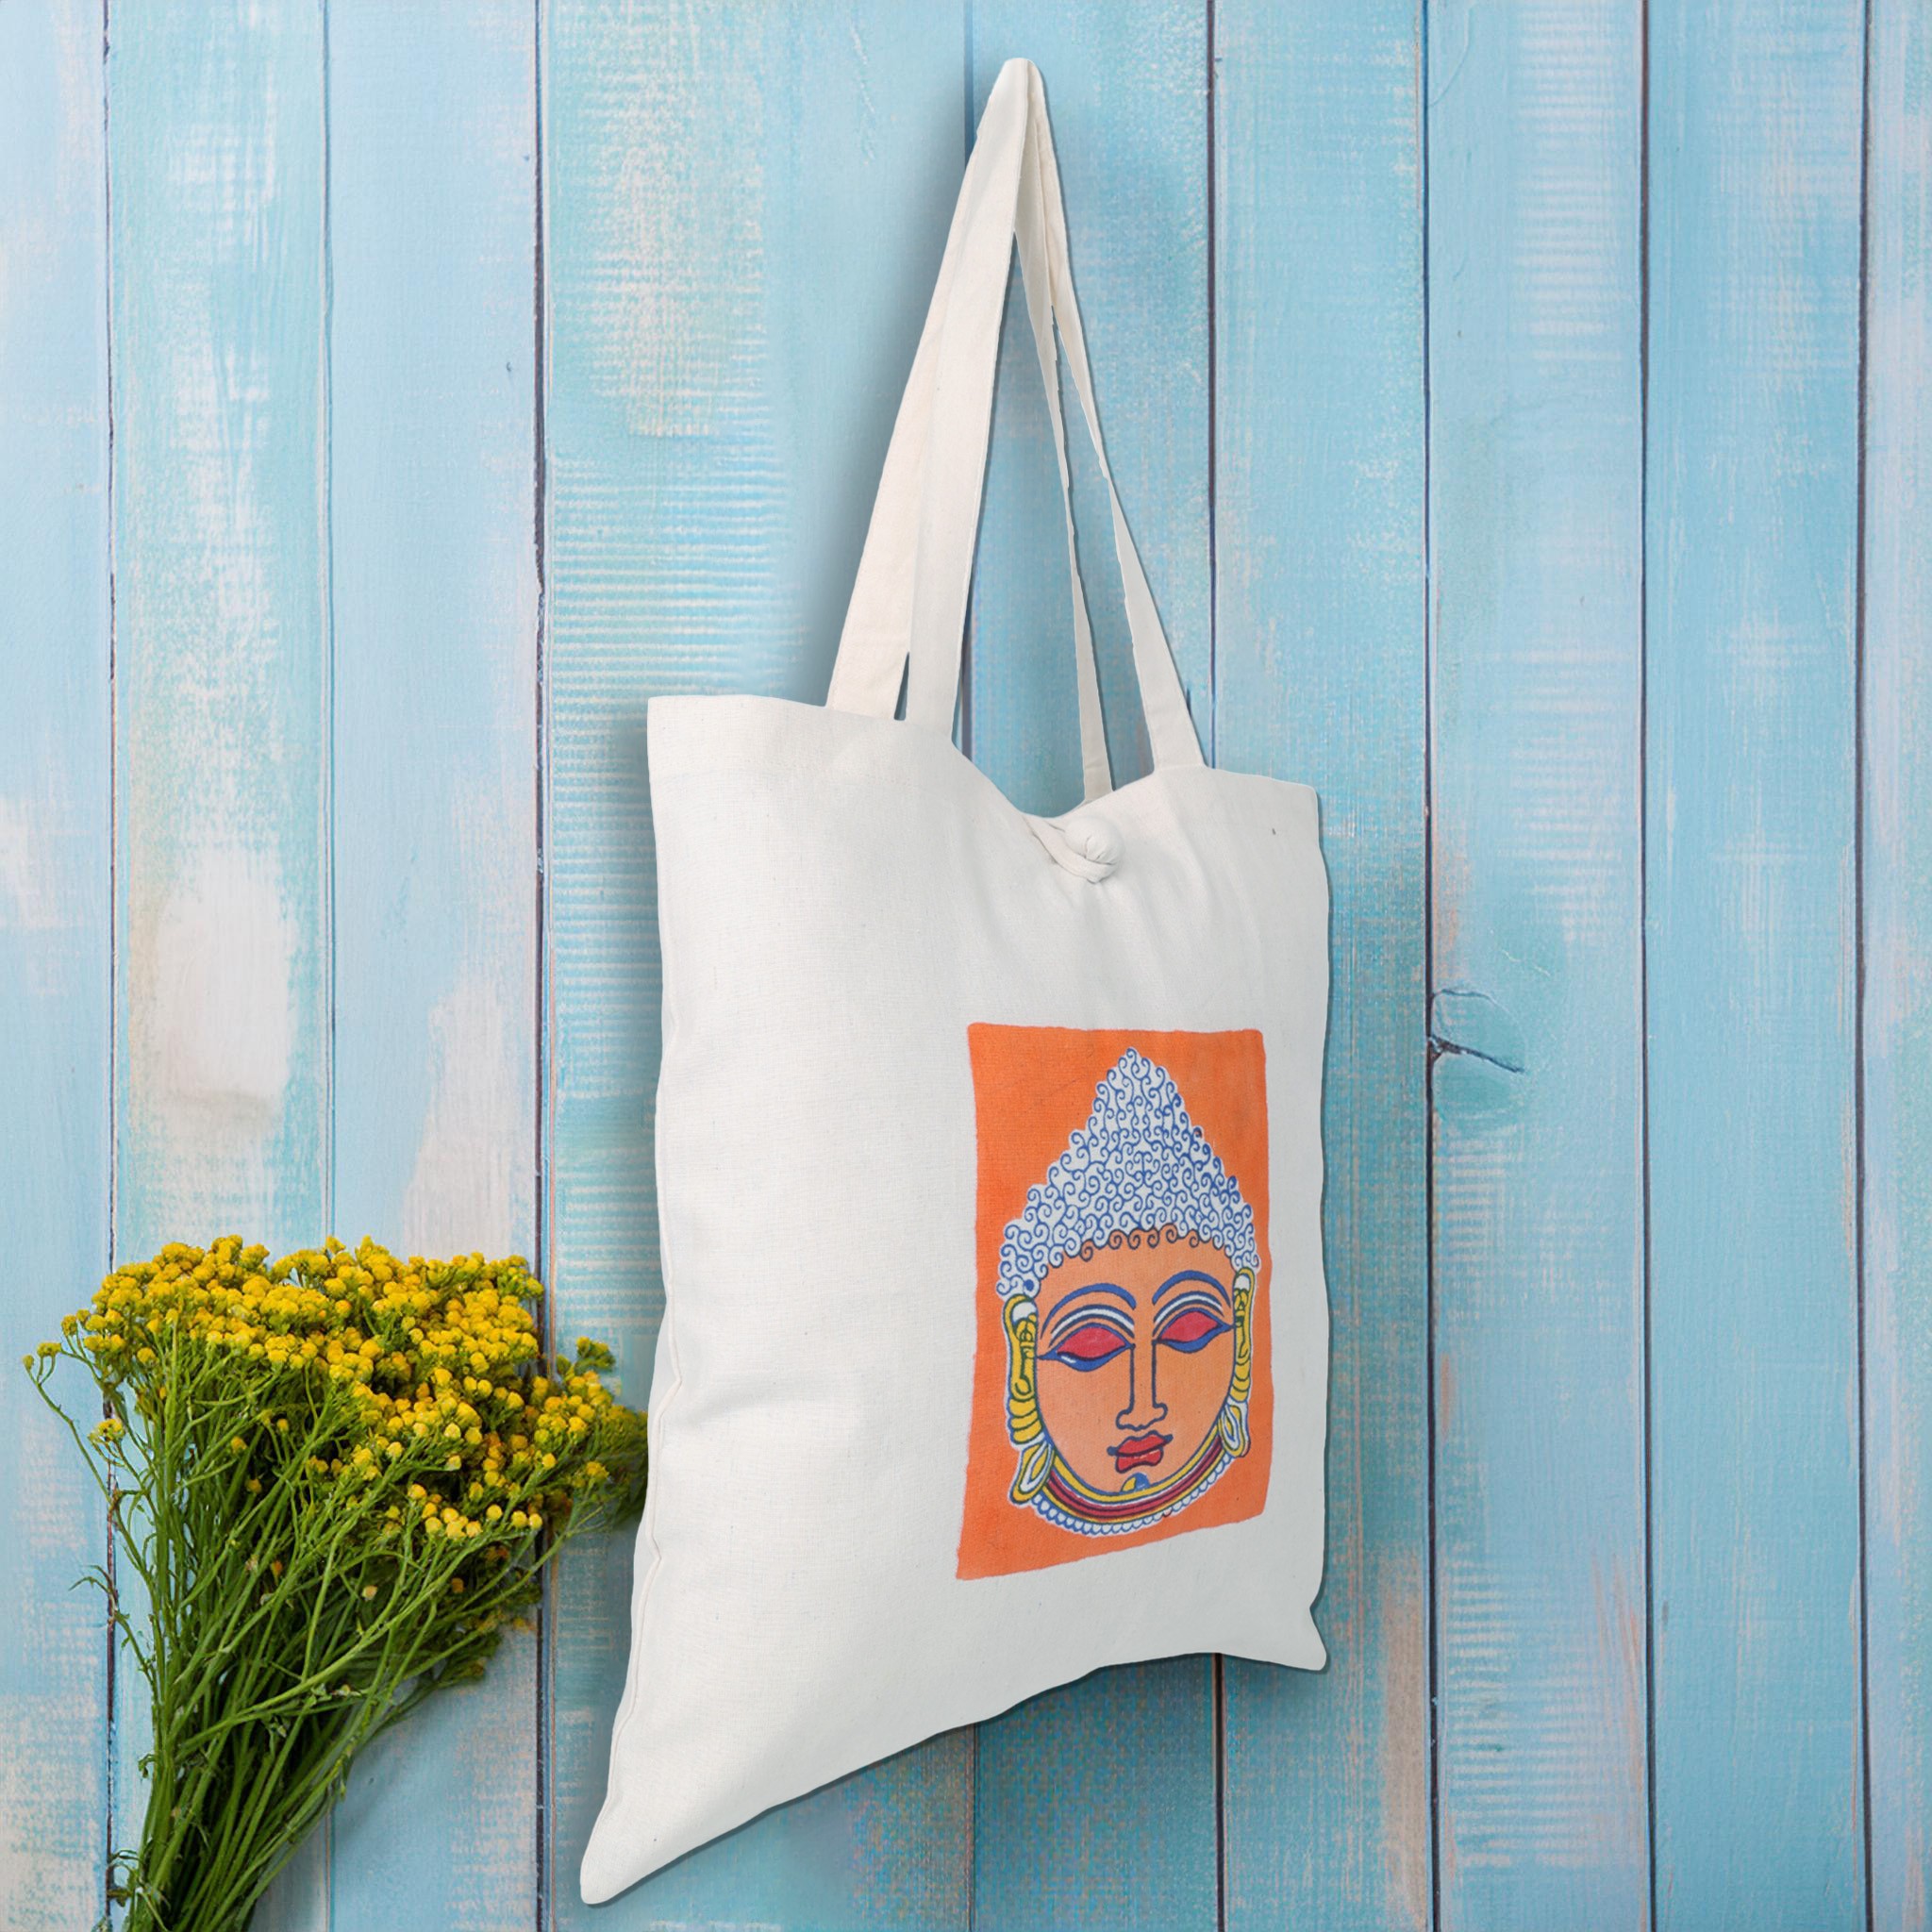 Tote Bag with Lord Buddha Face